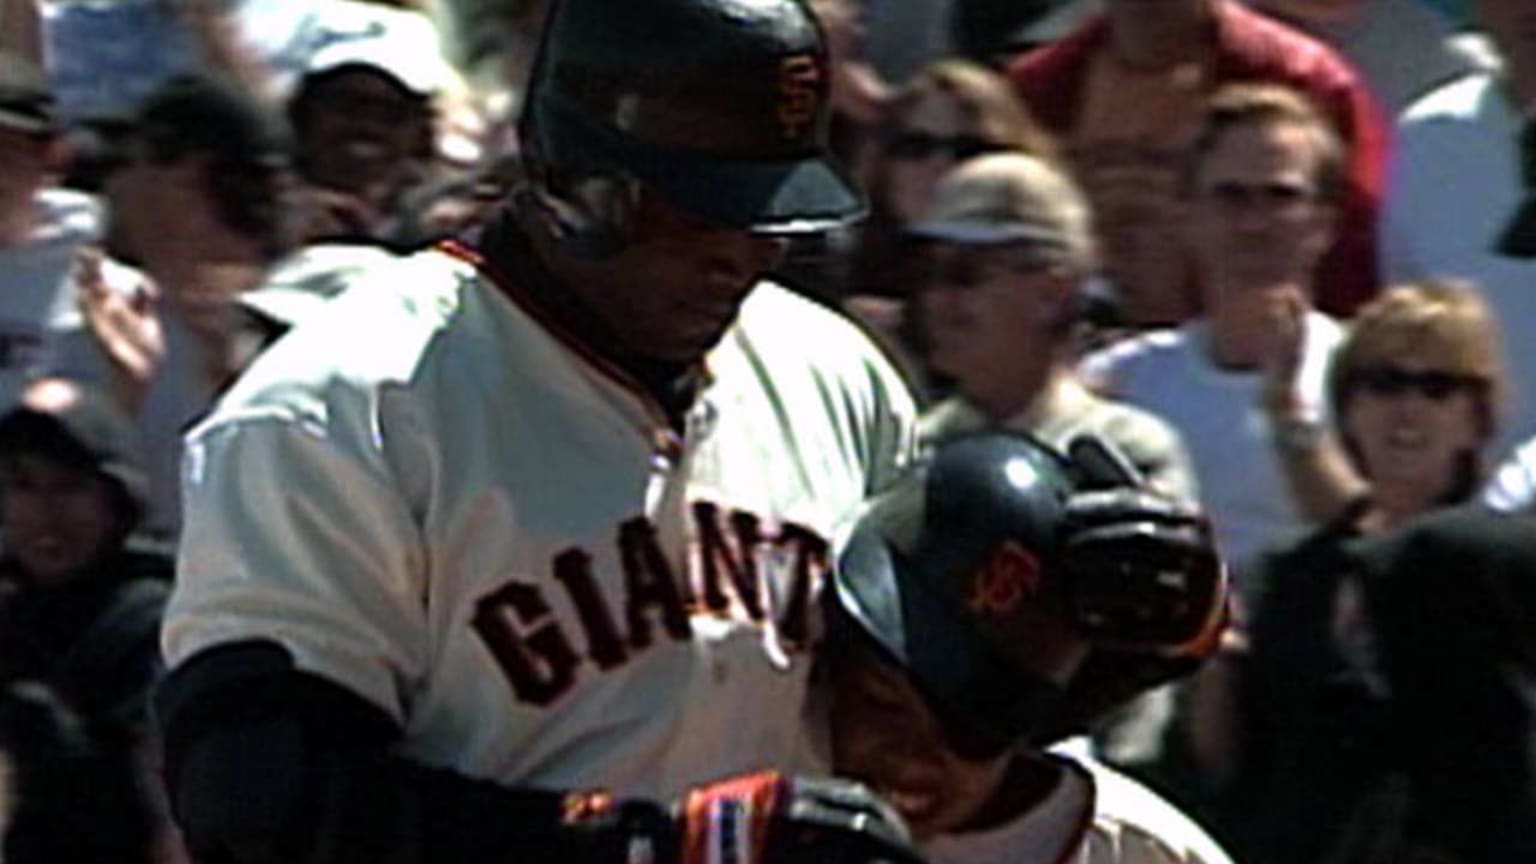 San Francisco Giants' Barry Bonds bumps into the outfield wall